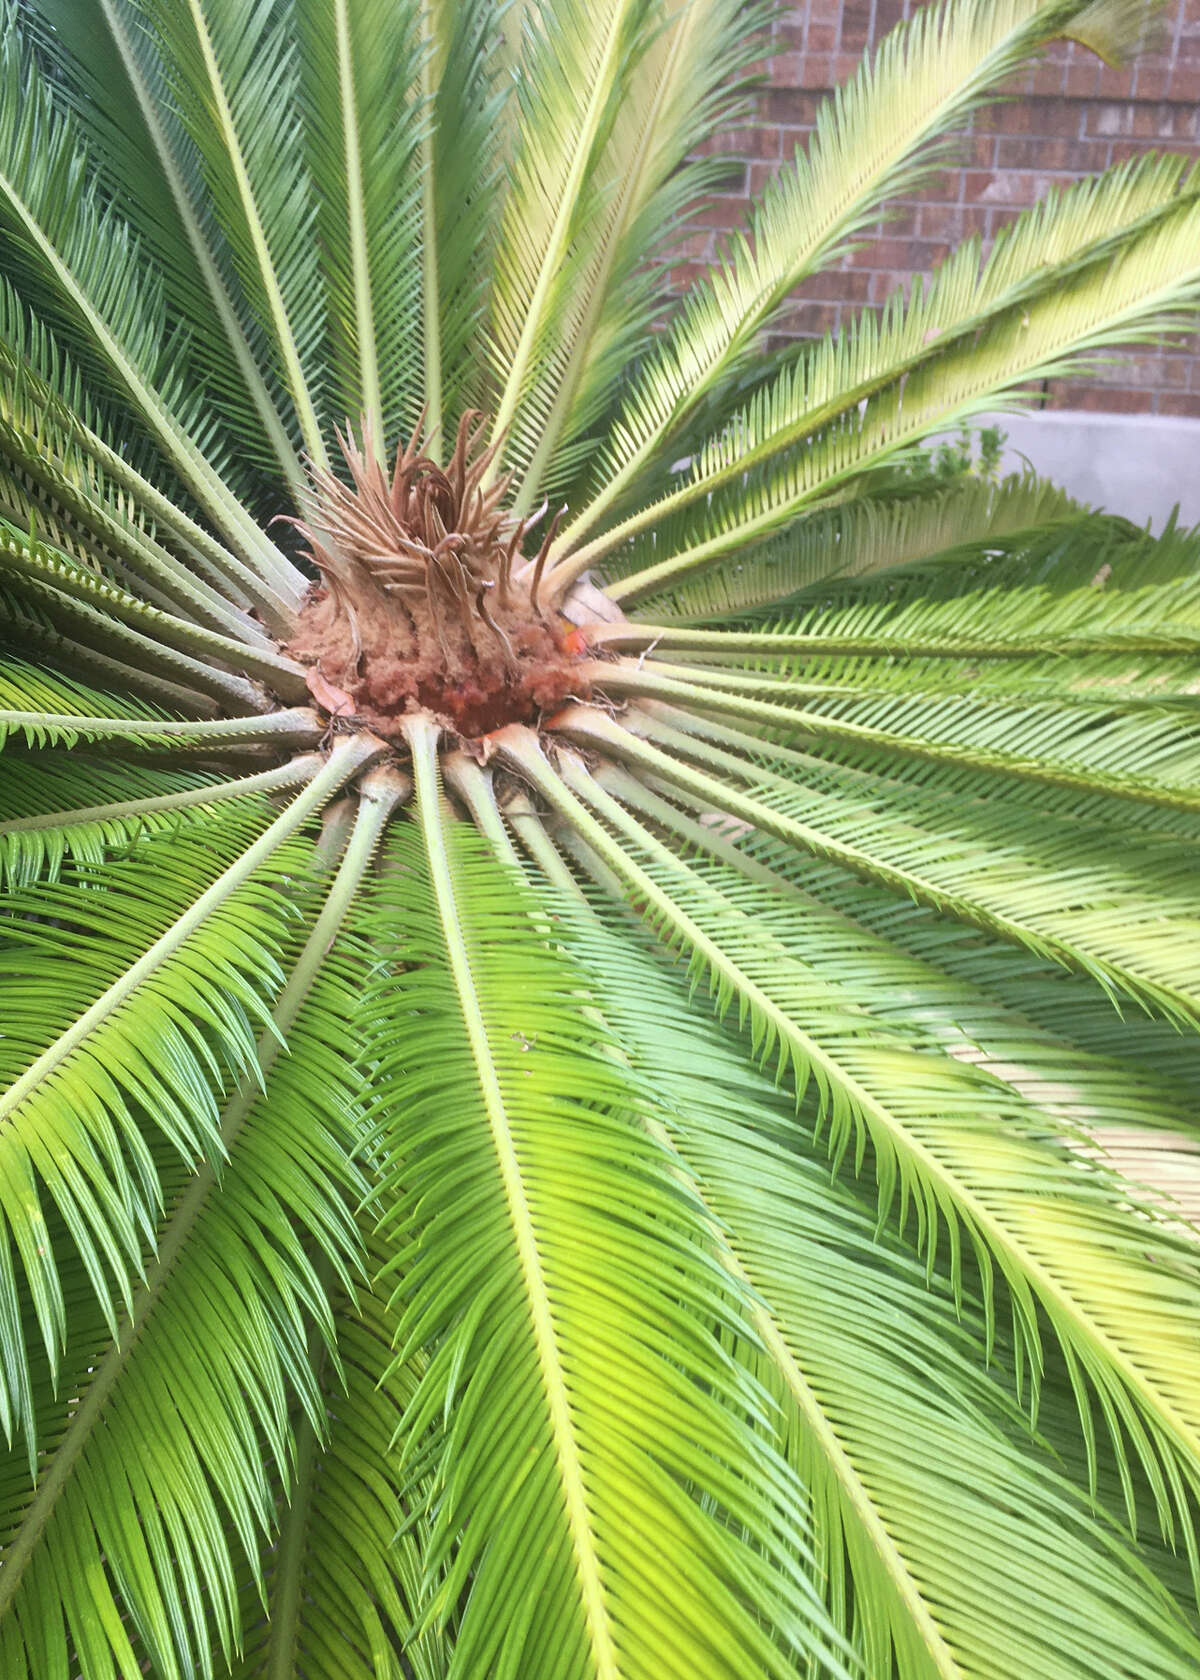 This sago palm might be suffering from sunscald or spider mites.